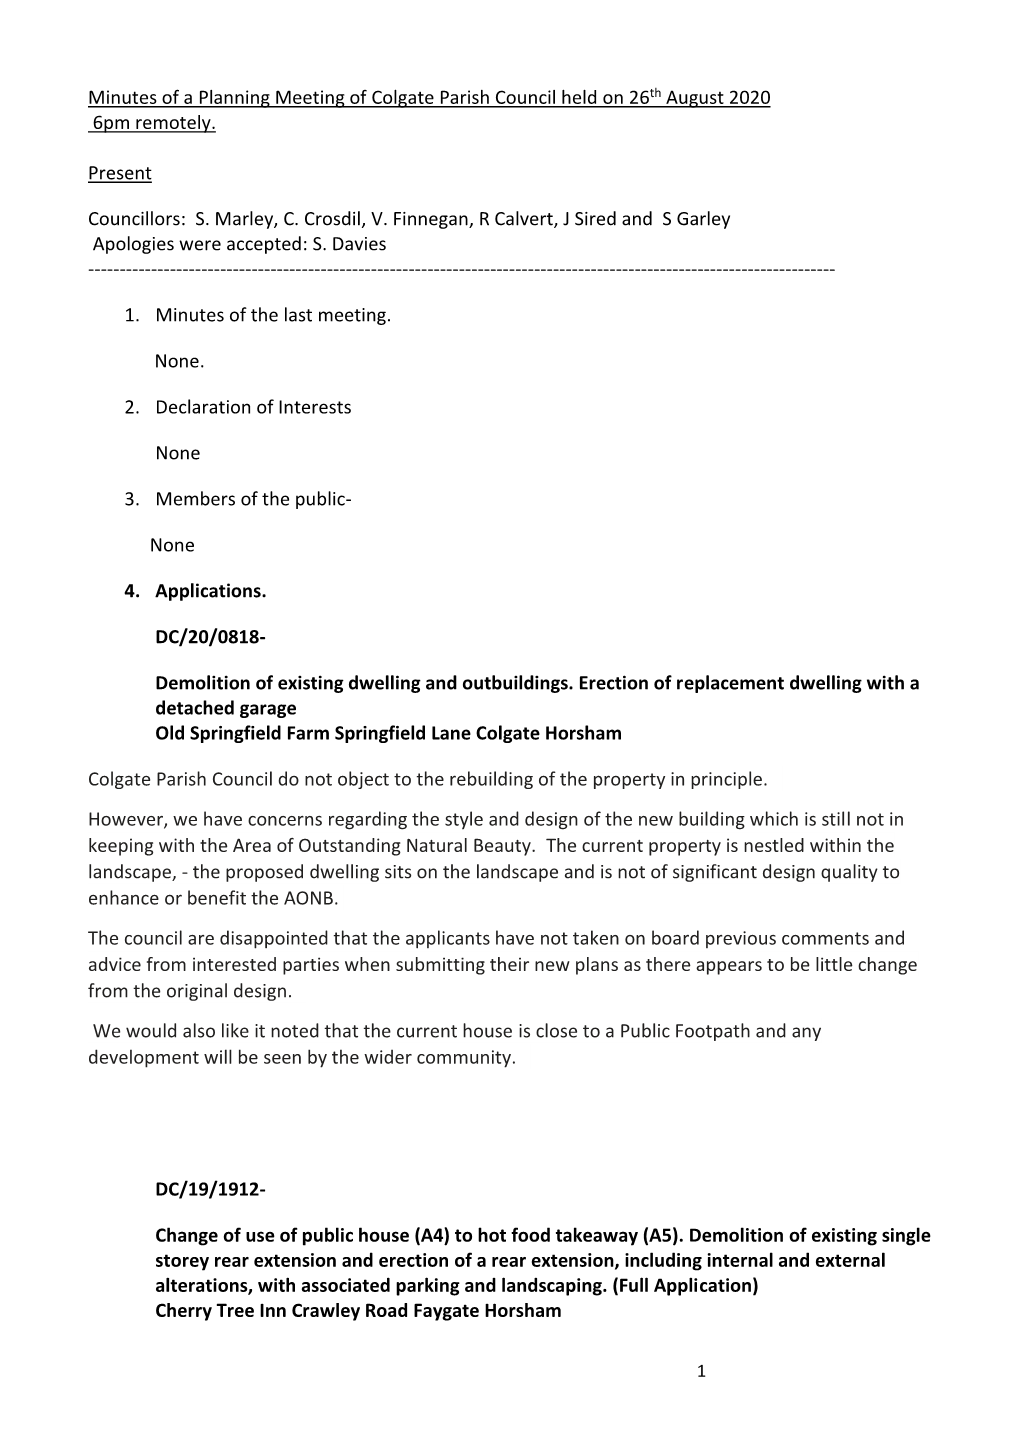 Minutes of a Planning Meeting of Colgate Parish Council Held on 26Th August 2020 6Pm Remotely